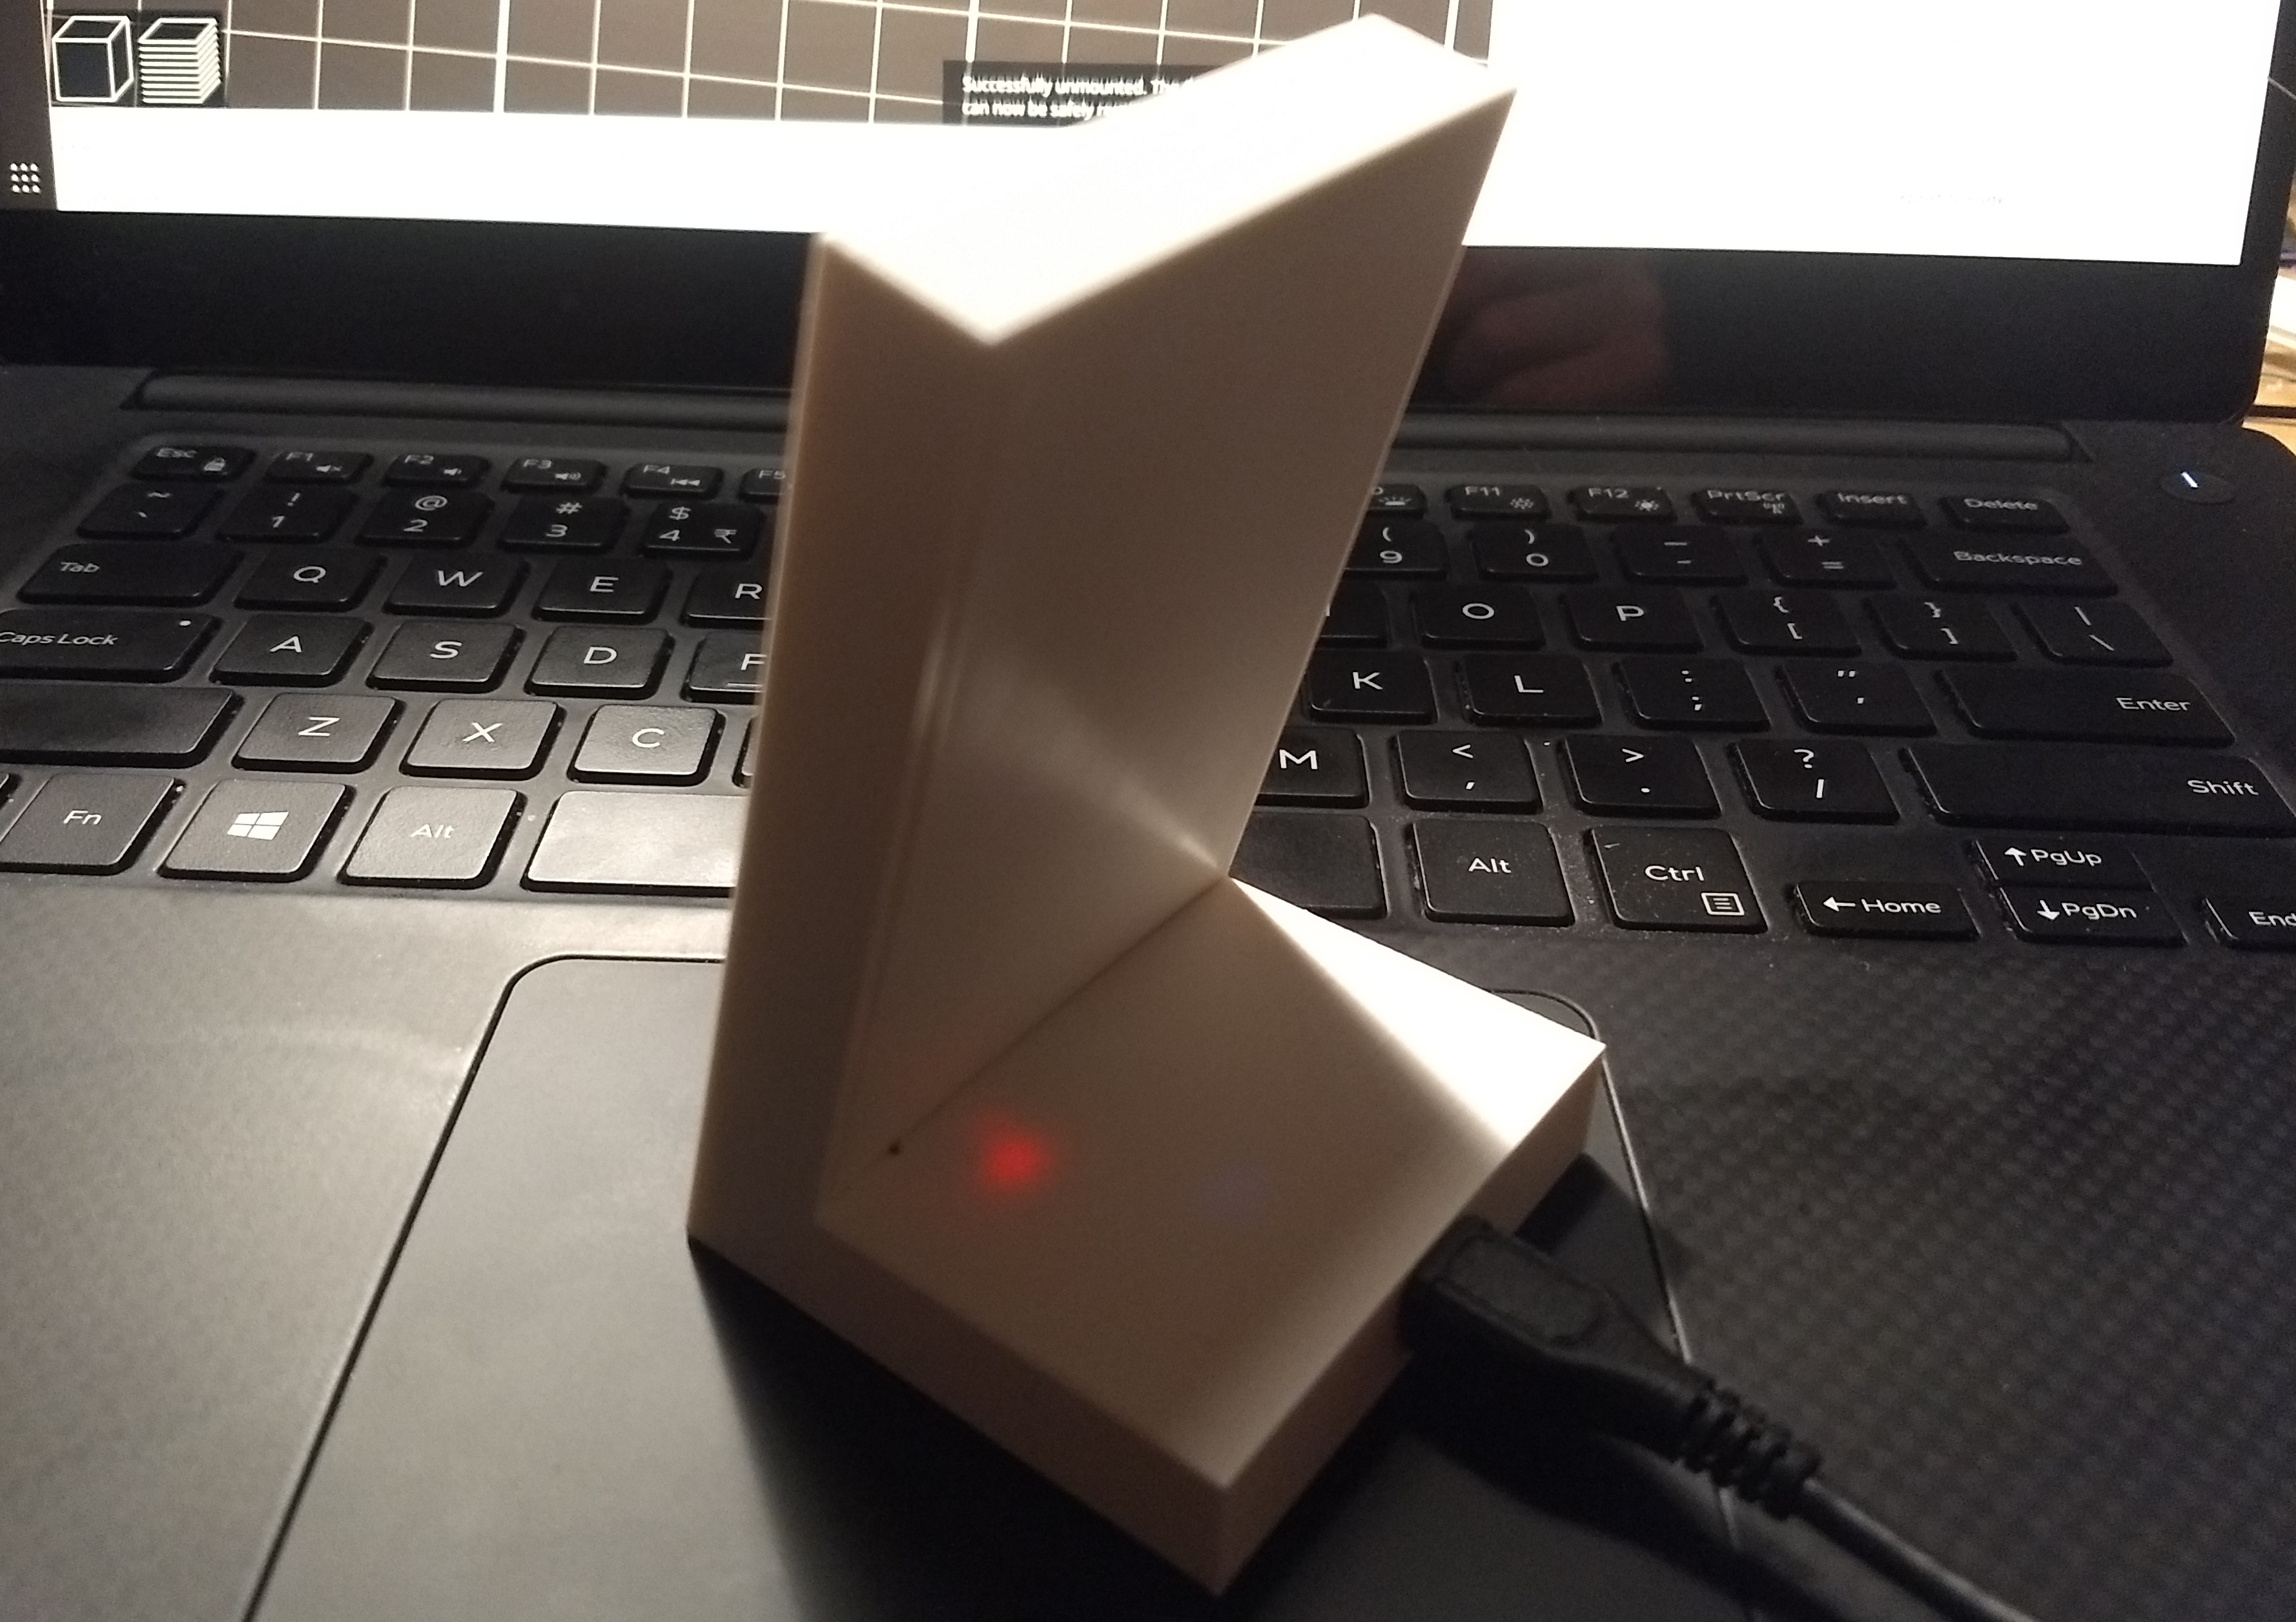 openHASP running in a 3D printed case